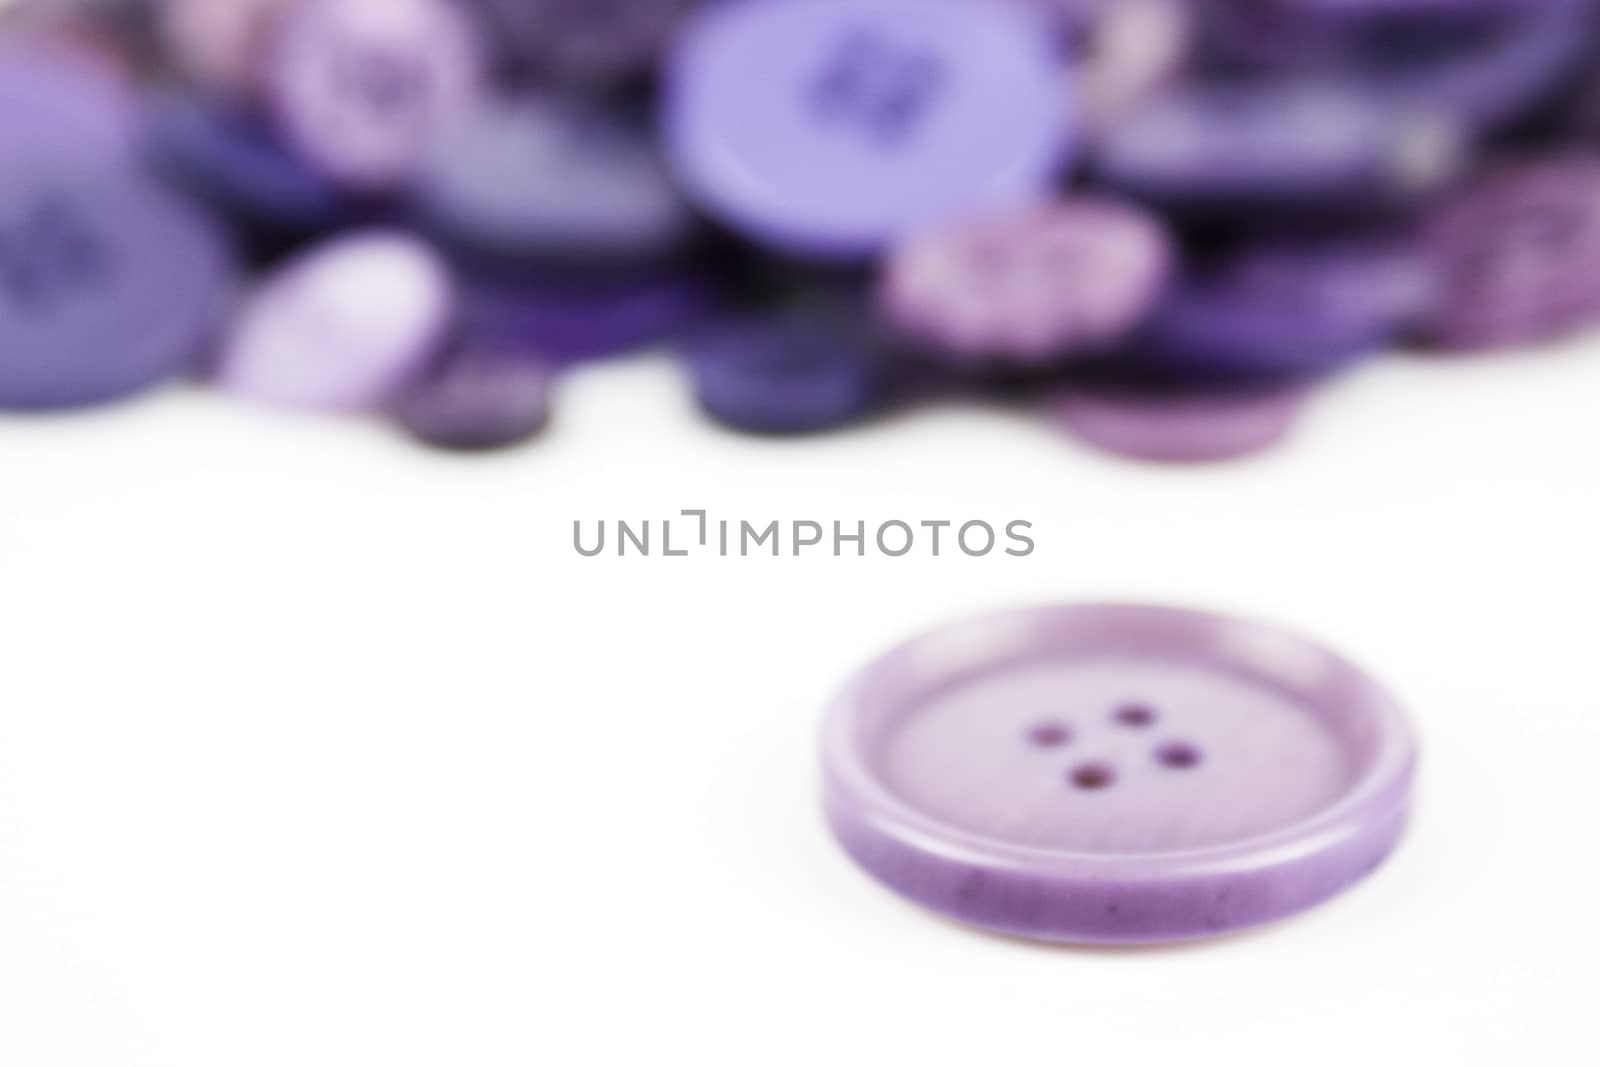 Close up of various purple button scattered on a white surface.